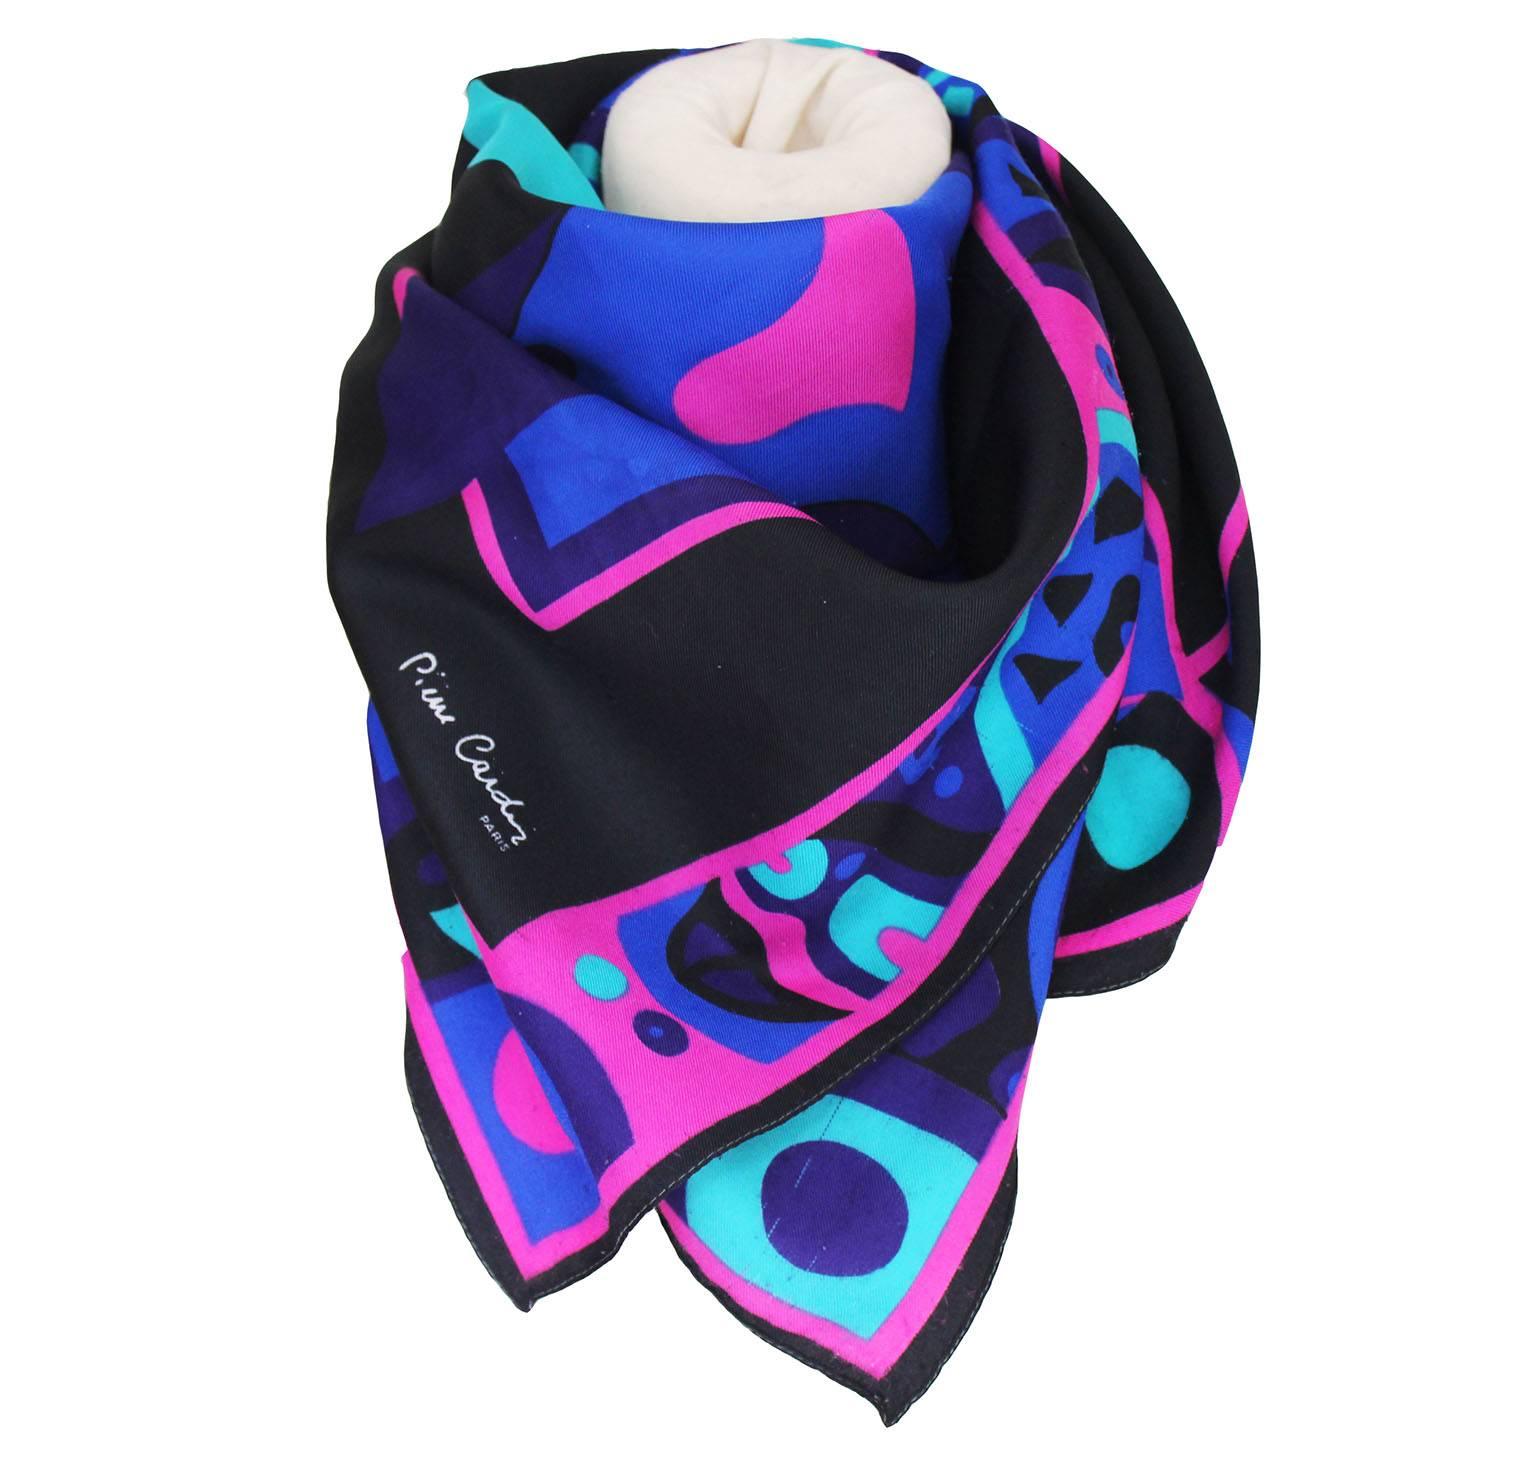 A colourful scarf with an abstract print from Pierre Cardin, Paris. The scarf has a black border, and a design in a combination pink, blue, black, turquoise and mauve.
It is in good, wearable condition, but there are a few small pulls, as seen in